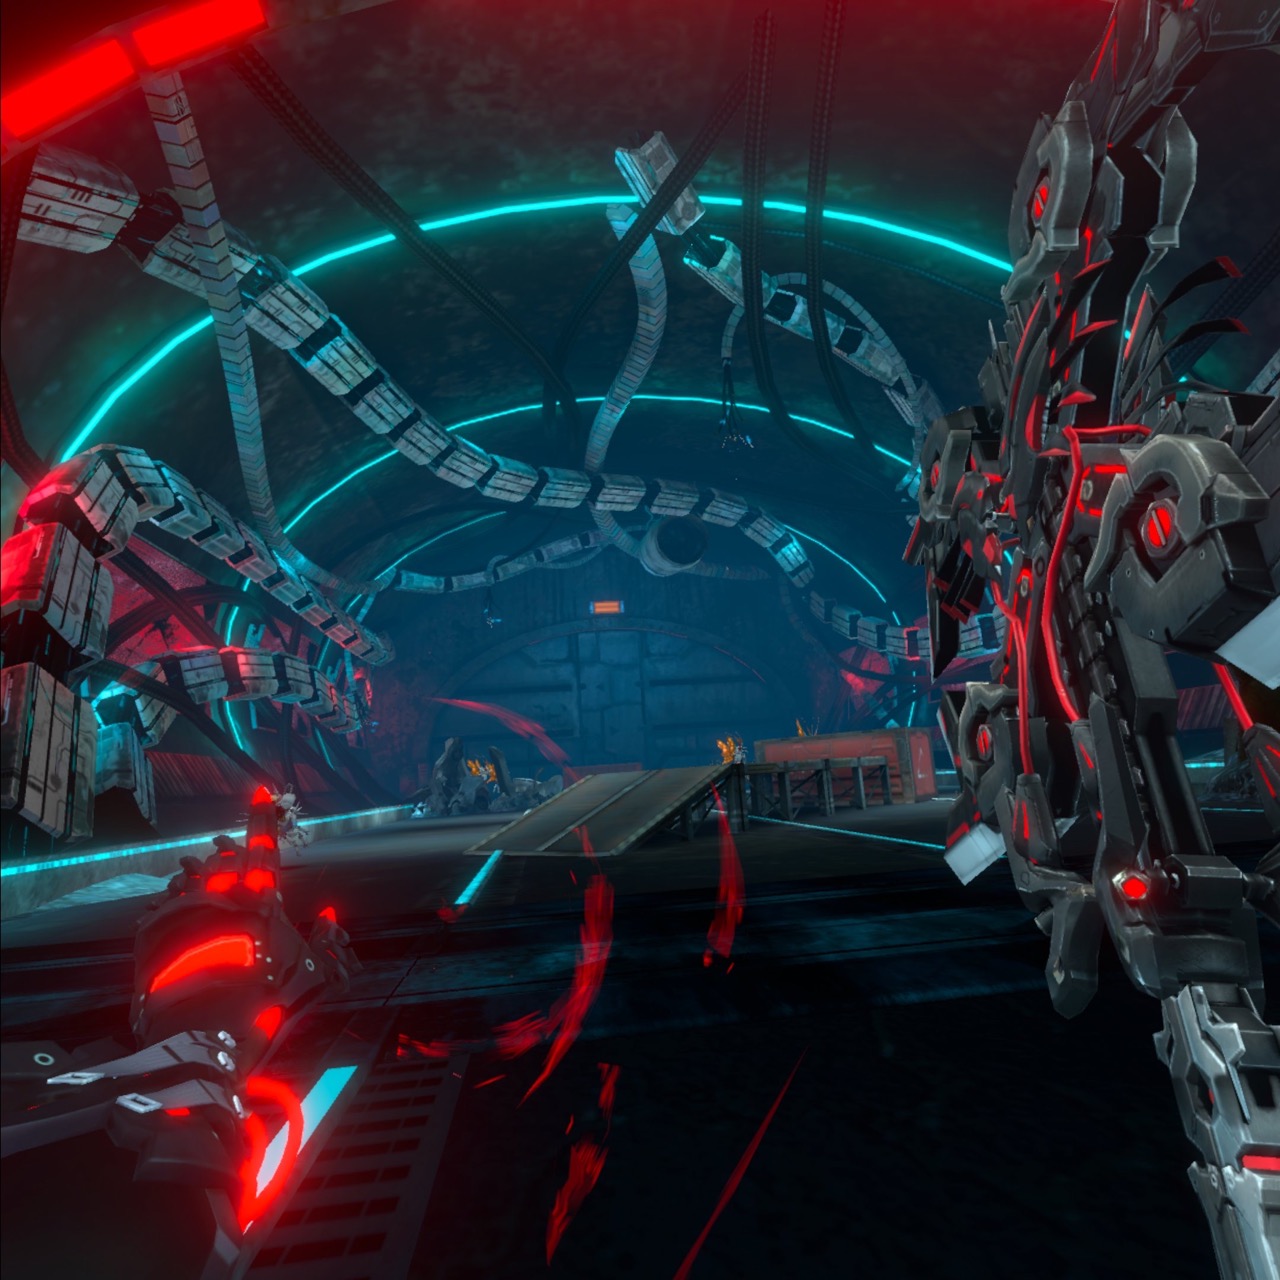 While SOUL COVENANT captures the anime aesthetic well with its intriguing sci-fi dystopian setting and stylish giant weapons, it ultimately falls short of truly engaging gameplay.